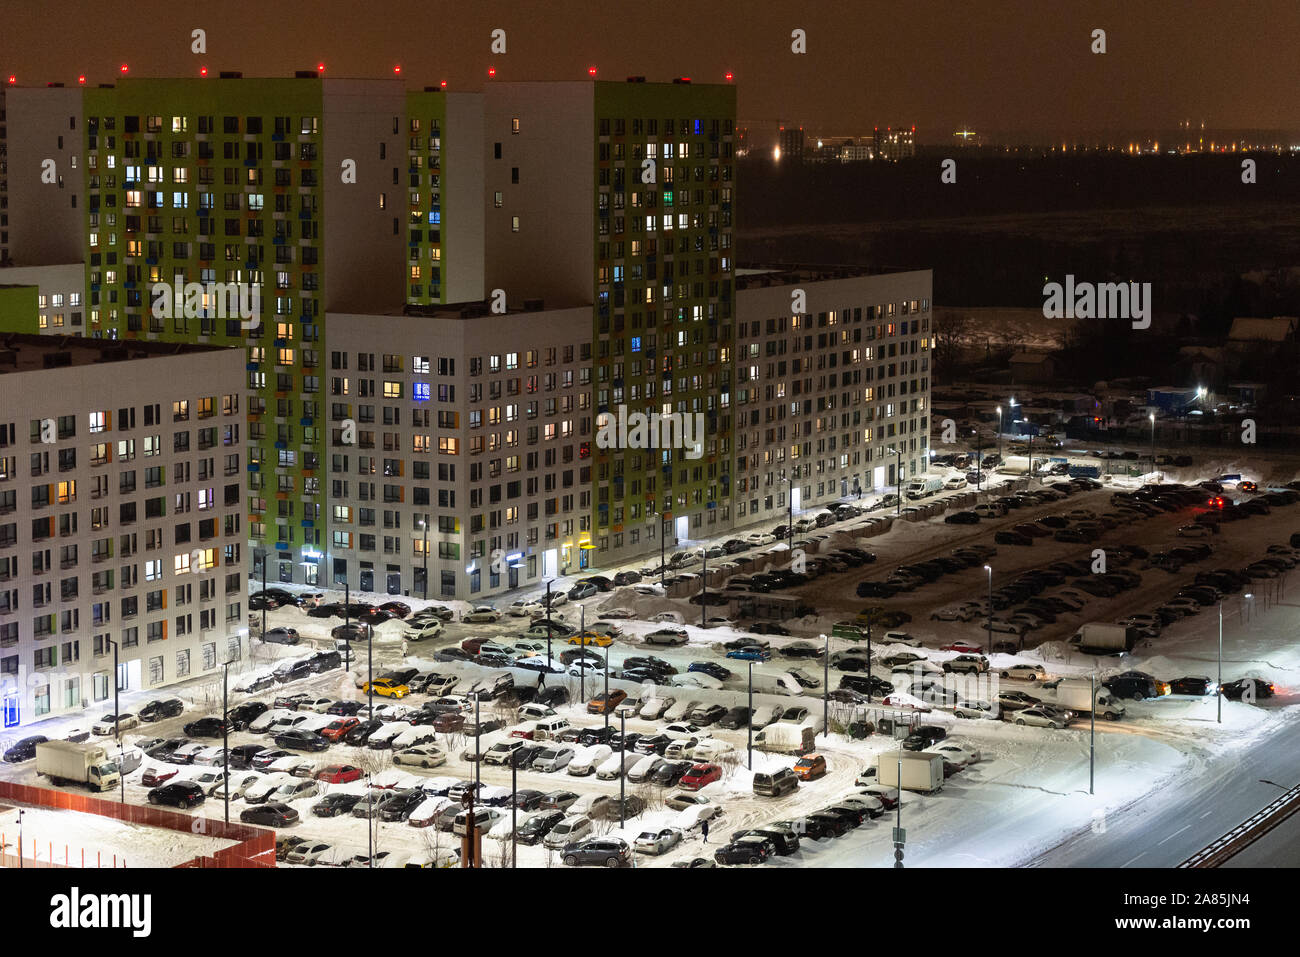 Moscow. December 2018. Dormitory suburb  of Moscow. Residential buildings with a parking lot at night in the light of lanterns. Stock Photo